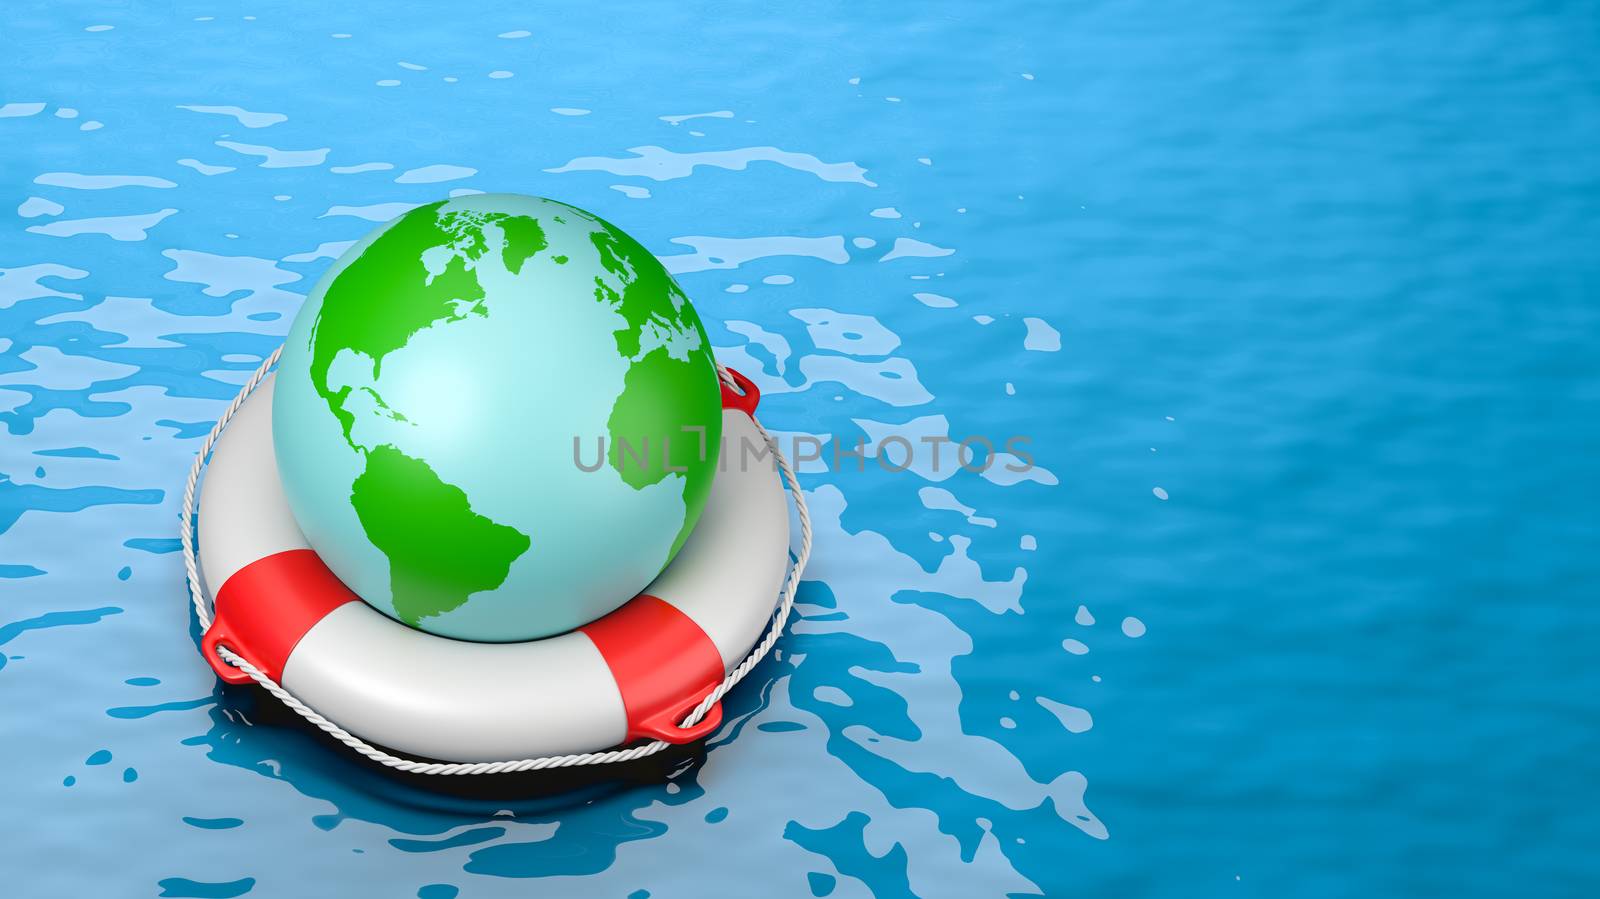 Earth Planet on a Lifebuoy in the Sea 3D Illustration with Copy Space